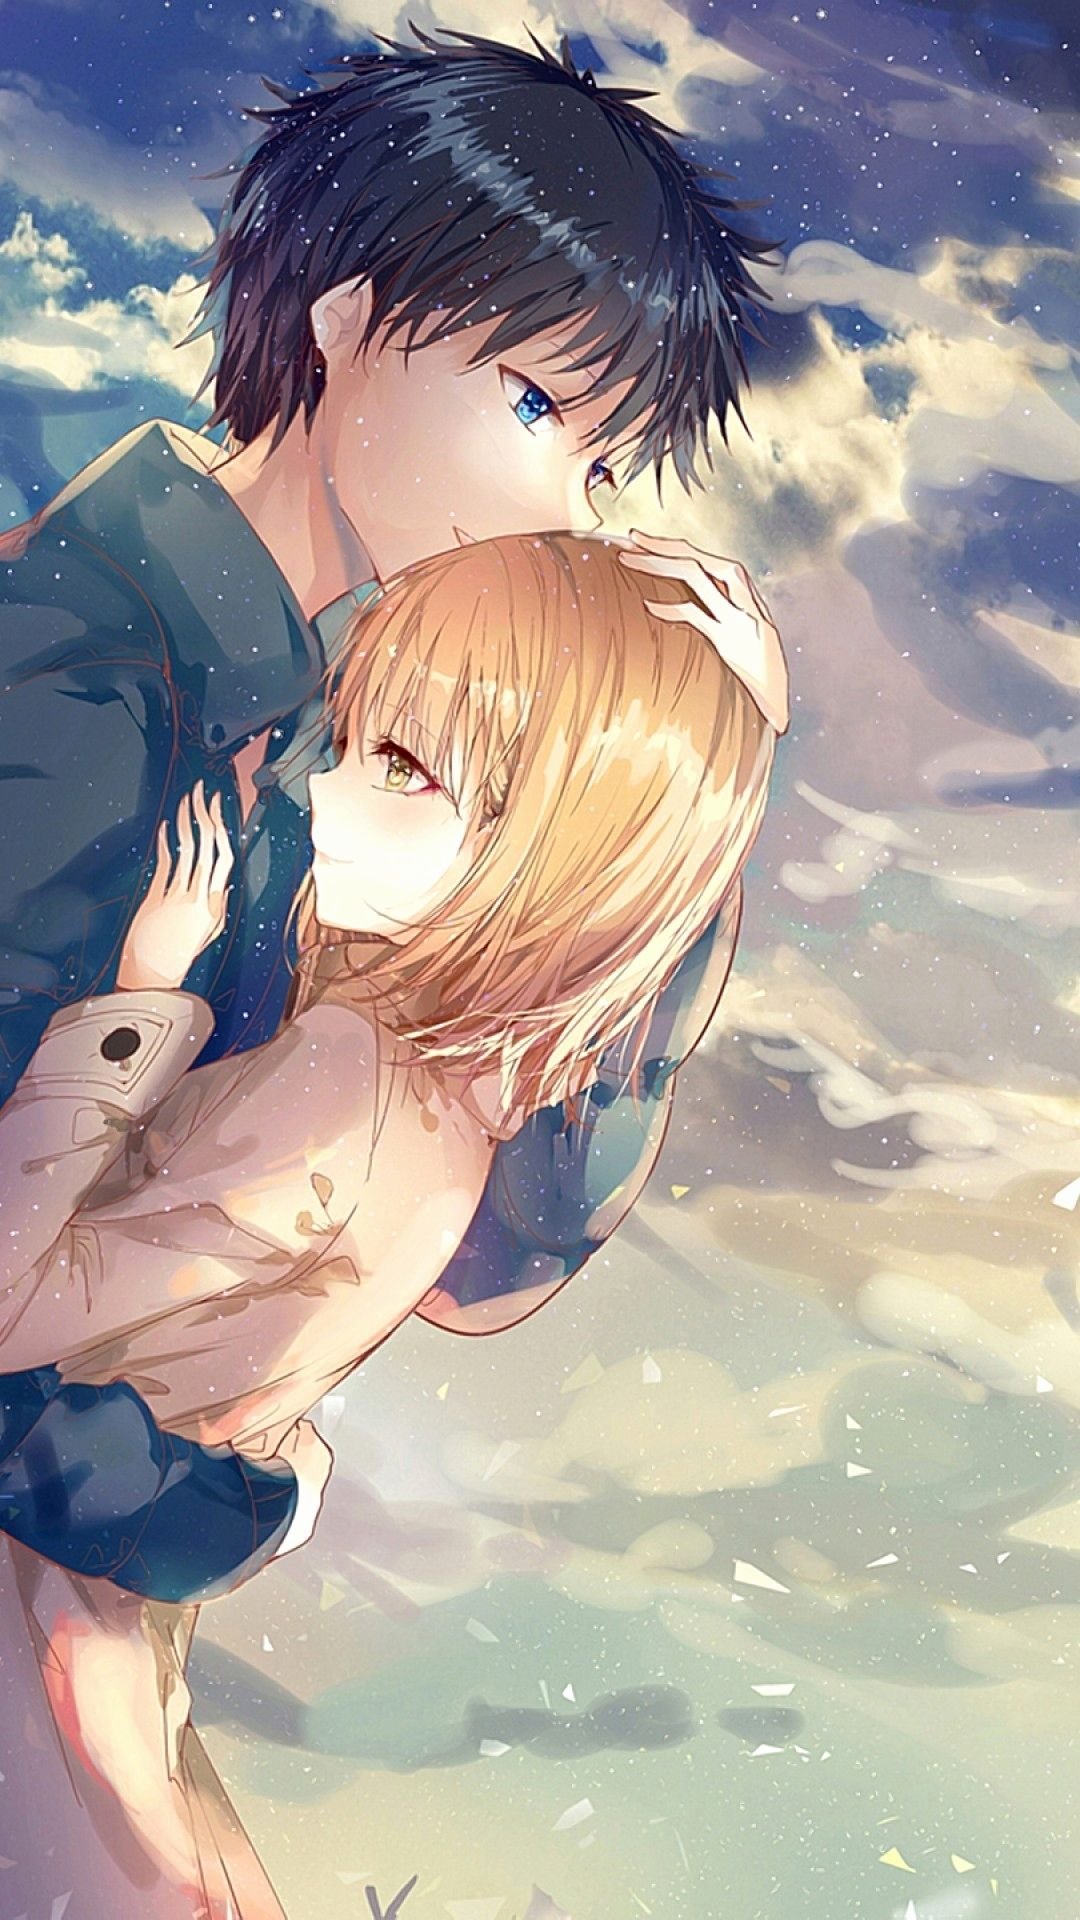 Anime couple hugging Wallpaper Download | MobCup